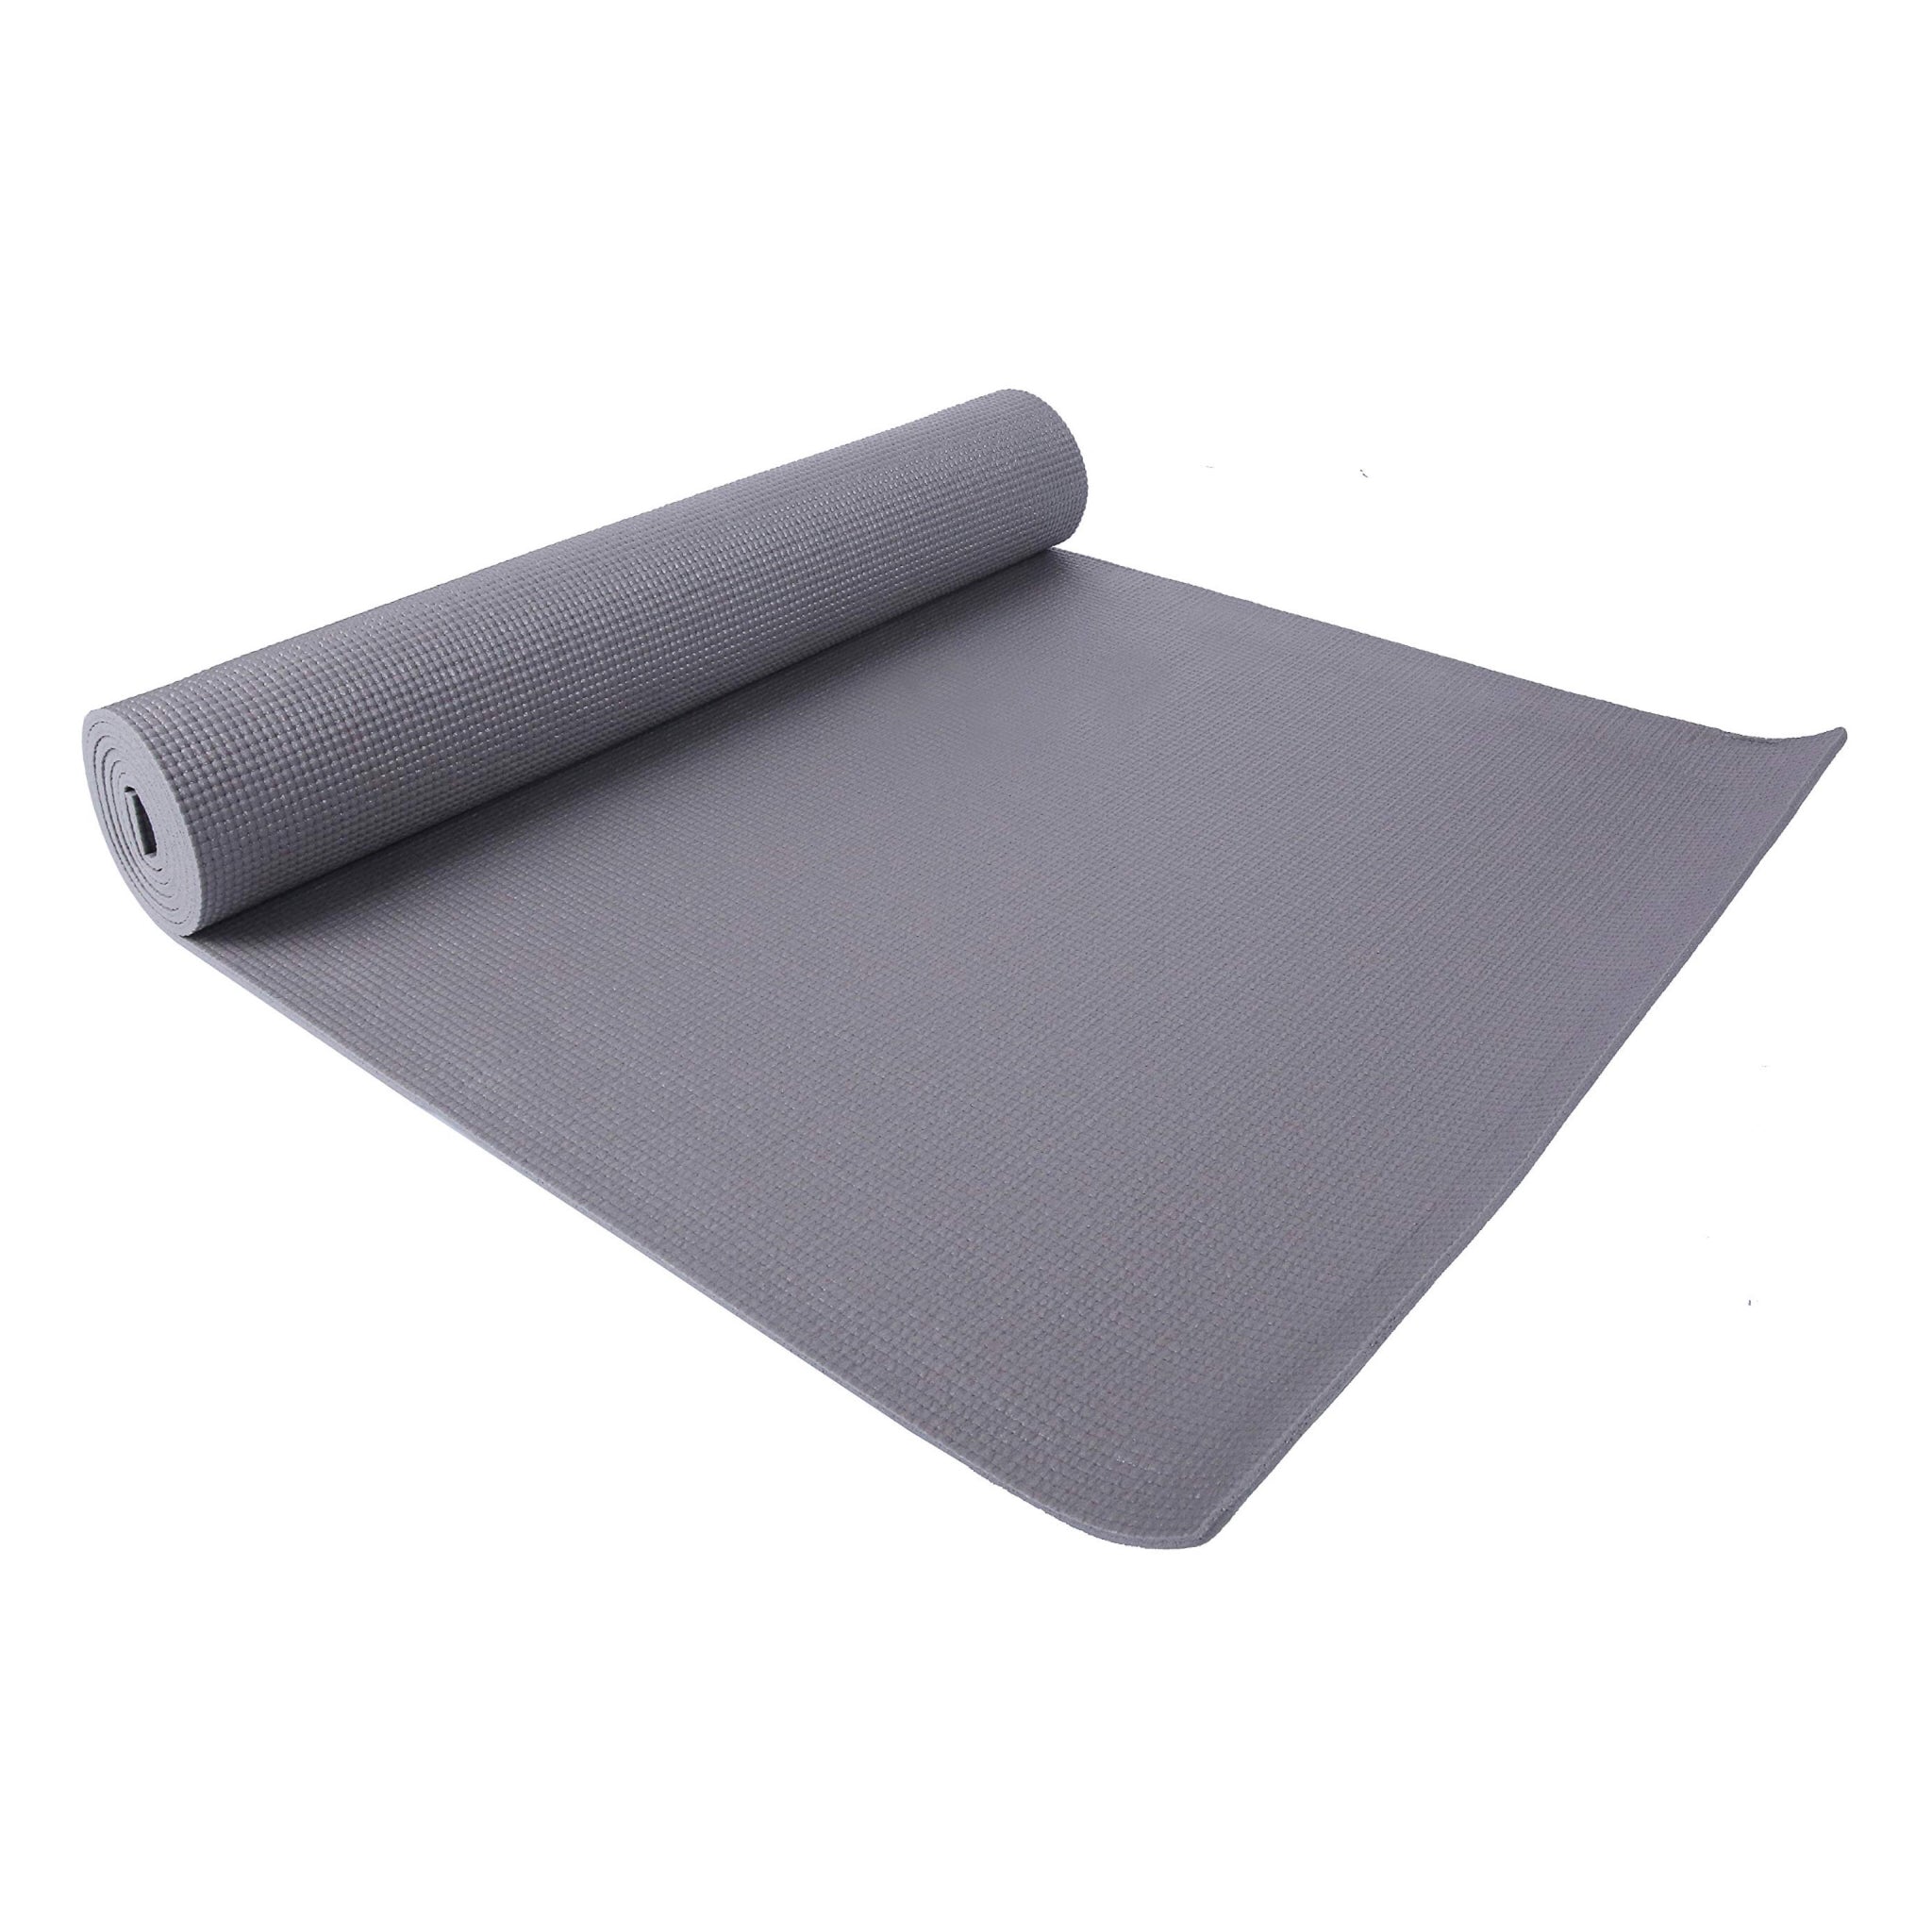 Refresh your old workout mat w/ BalanceFrom's highly-rated GoYoga